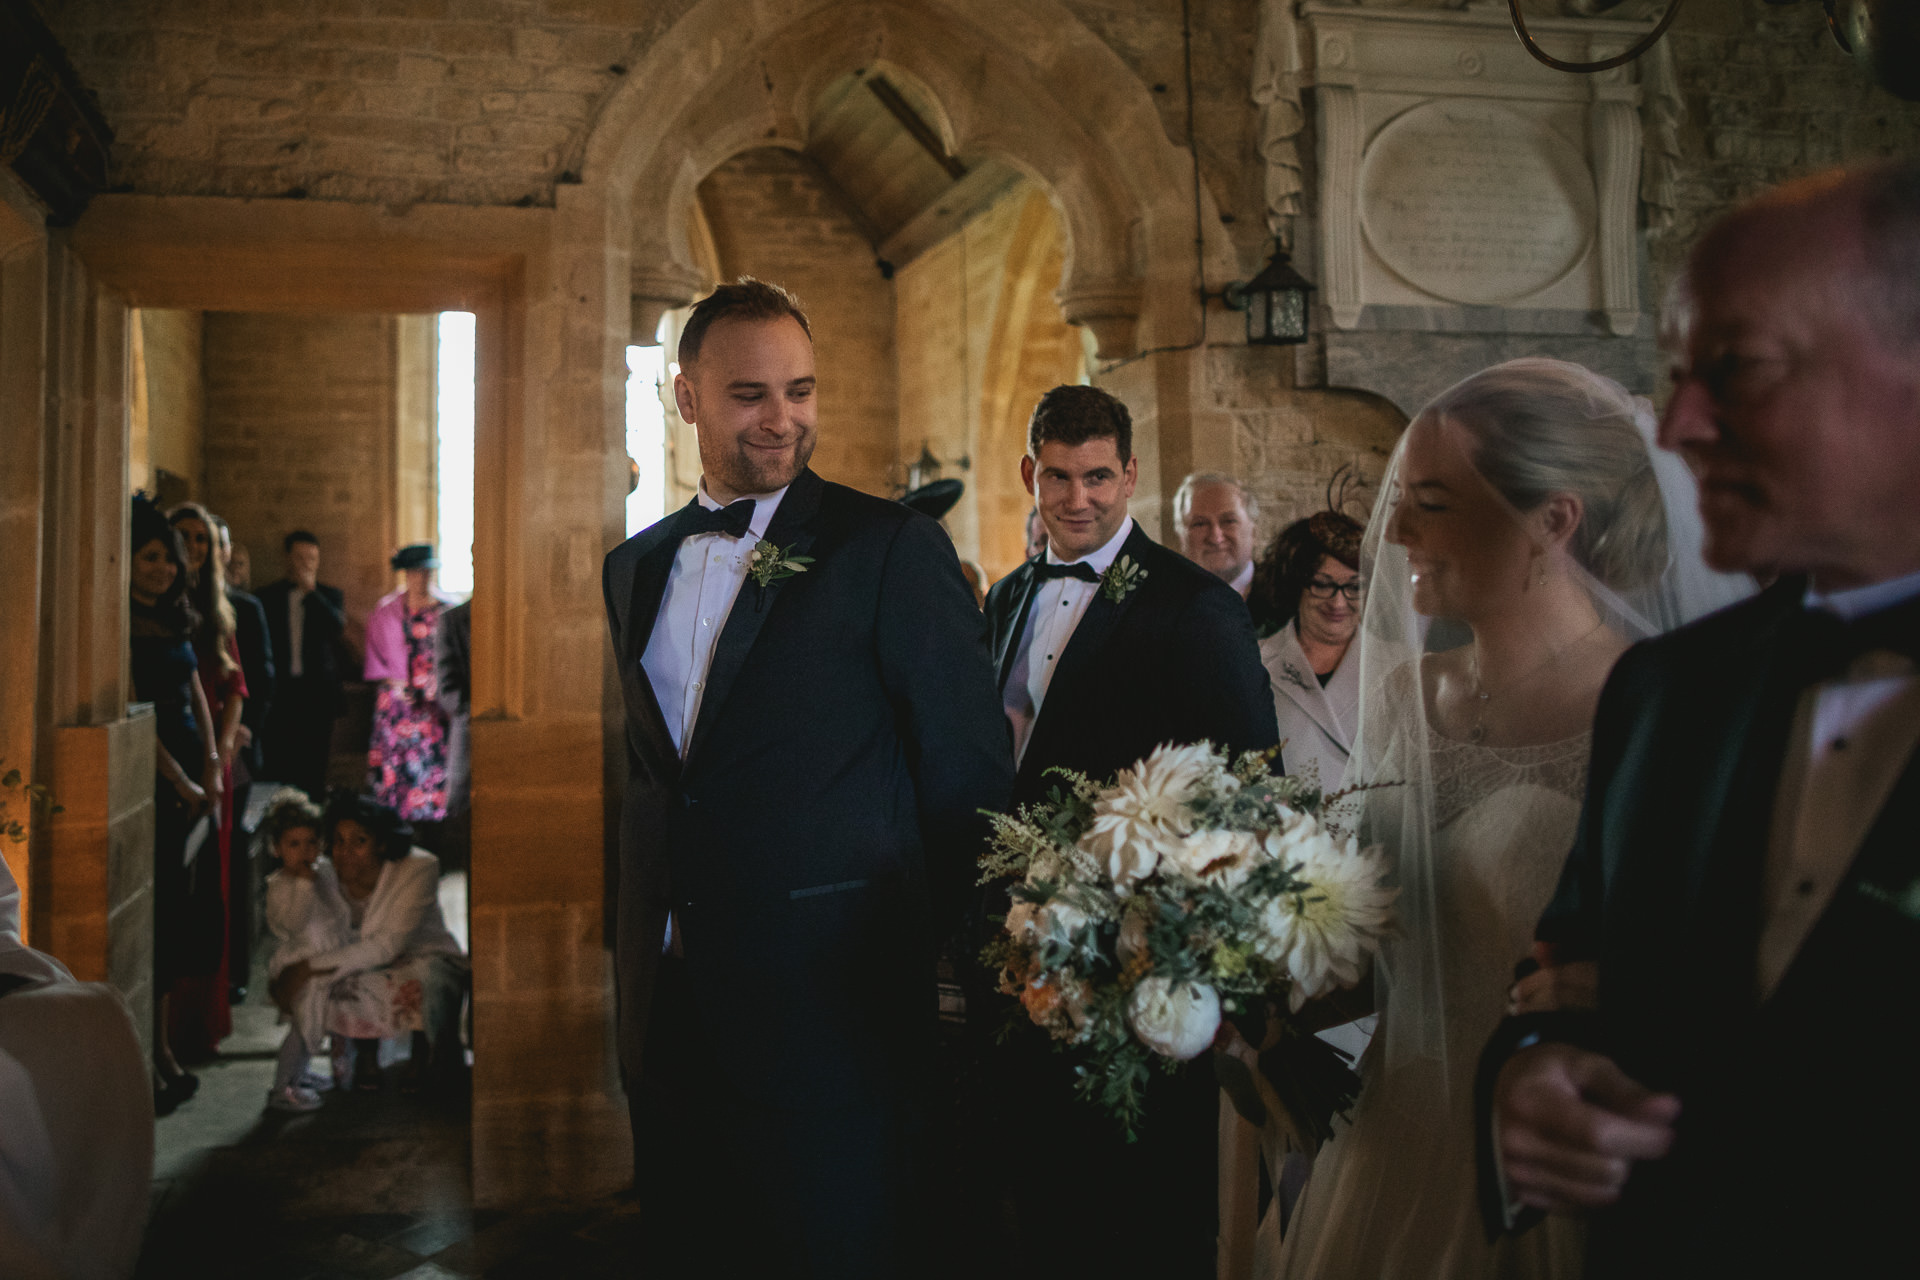 Groom smiling at bride at the front of the church